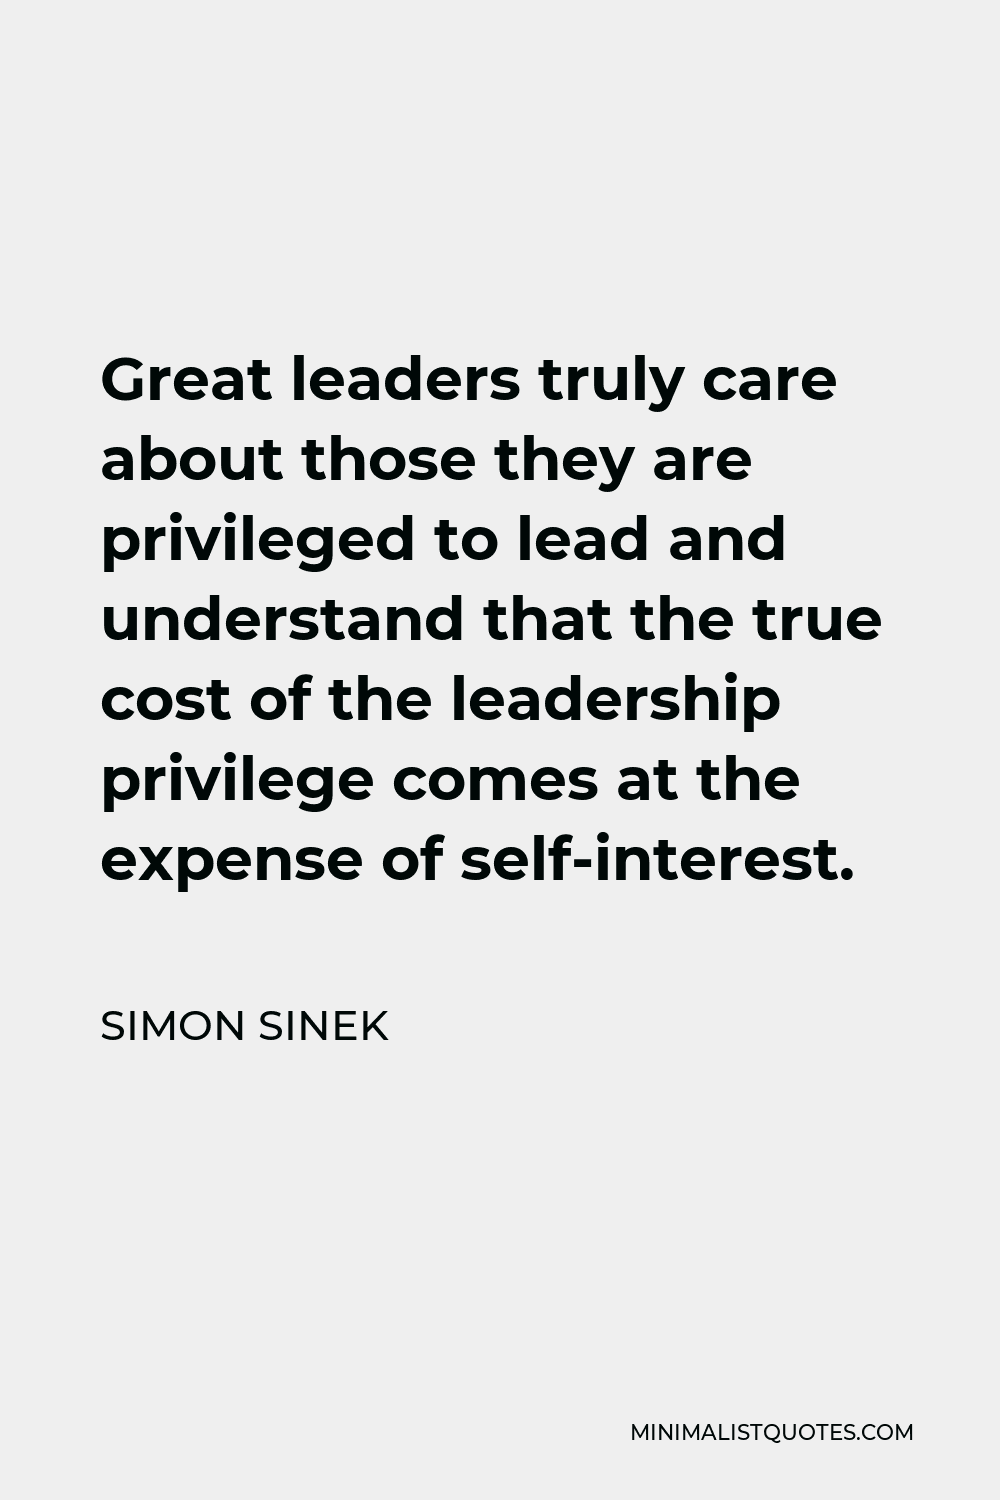 Simon Sinek Quote - Great leaders truly care about those they are privileged to lead and understand that the true cost of the leadership privilege comes at the expense of self-interest.